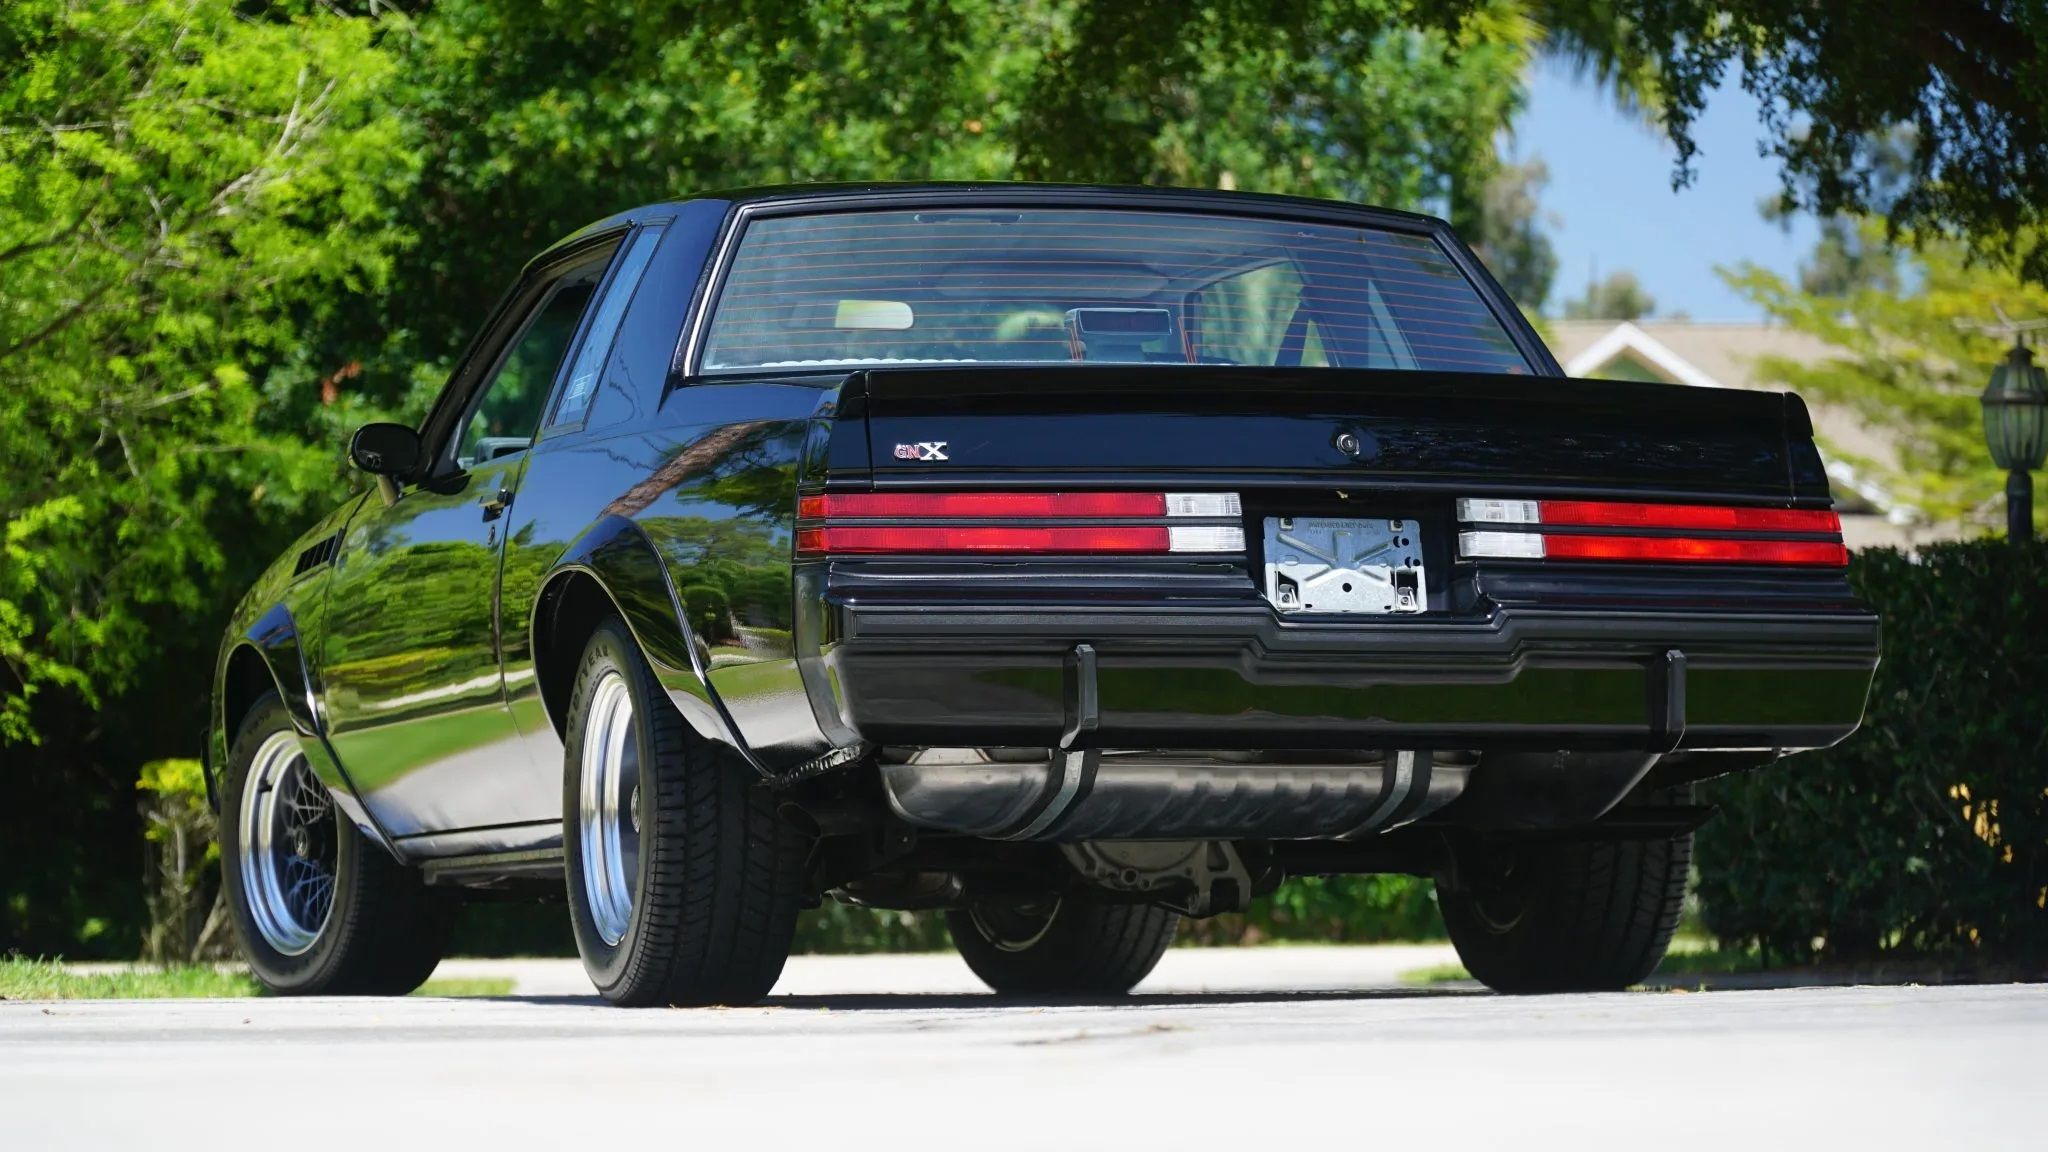 The rear end of the 1987 Buick GNX.